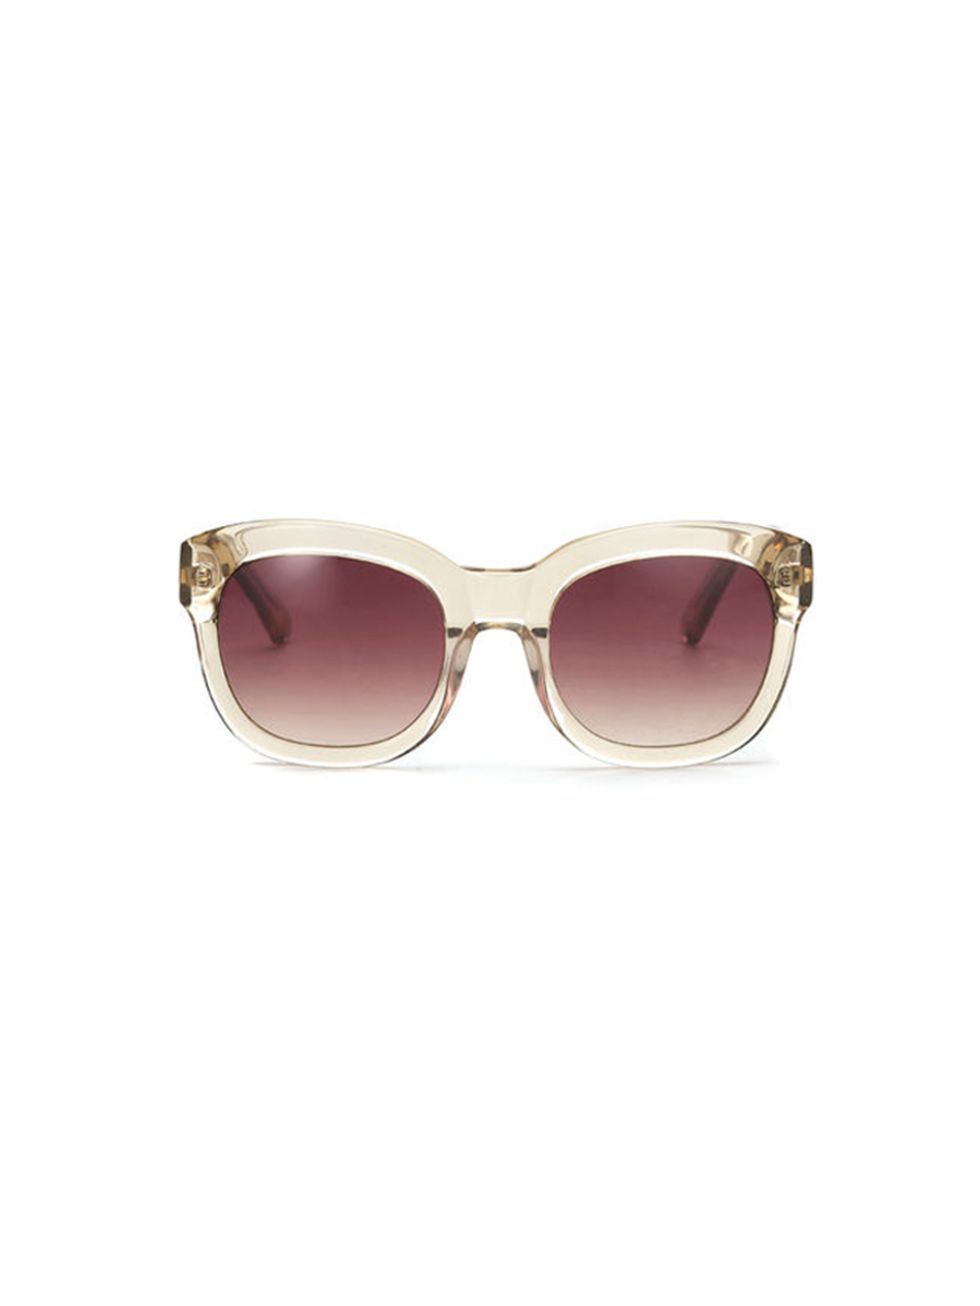 <p><a href="http://www.whistles.com/women/accessories/sunglasses/ali-heavy-frame-sunglasses.html?dwvar_ali-heavy-frame-sunglasses_color=Neutral#start=1" target="_blank">Whistles</a> sunglasses, £70</p>